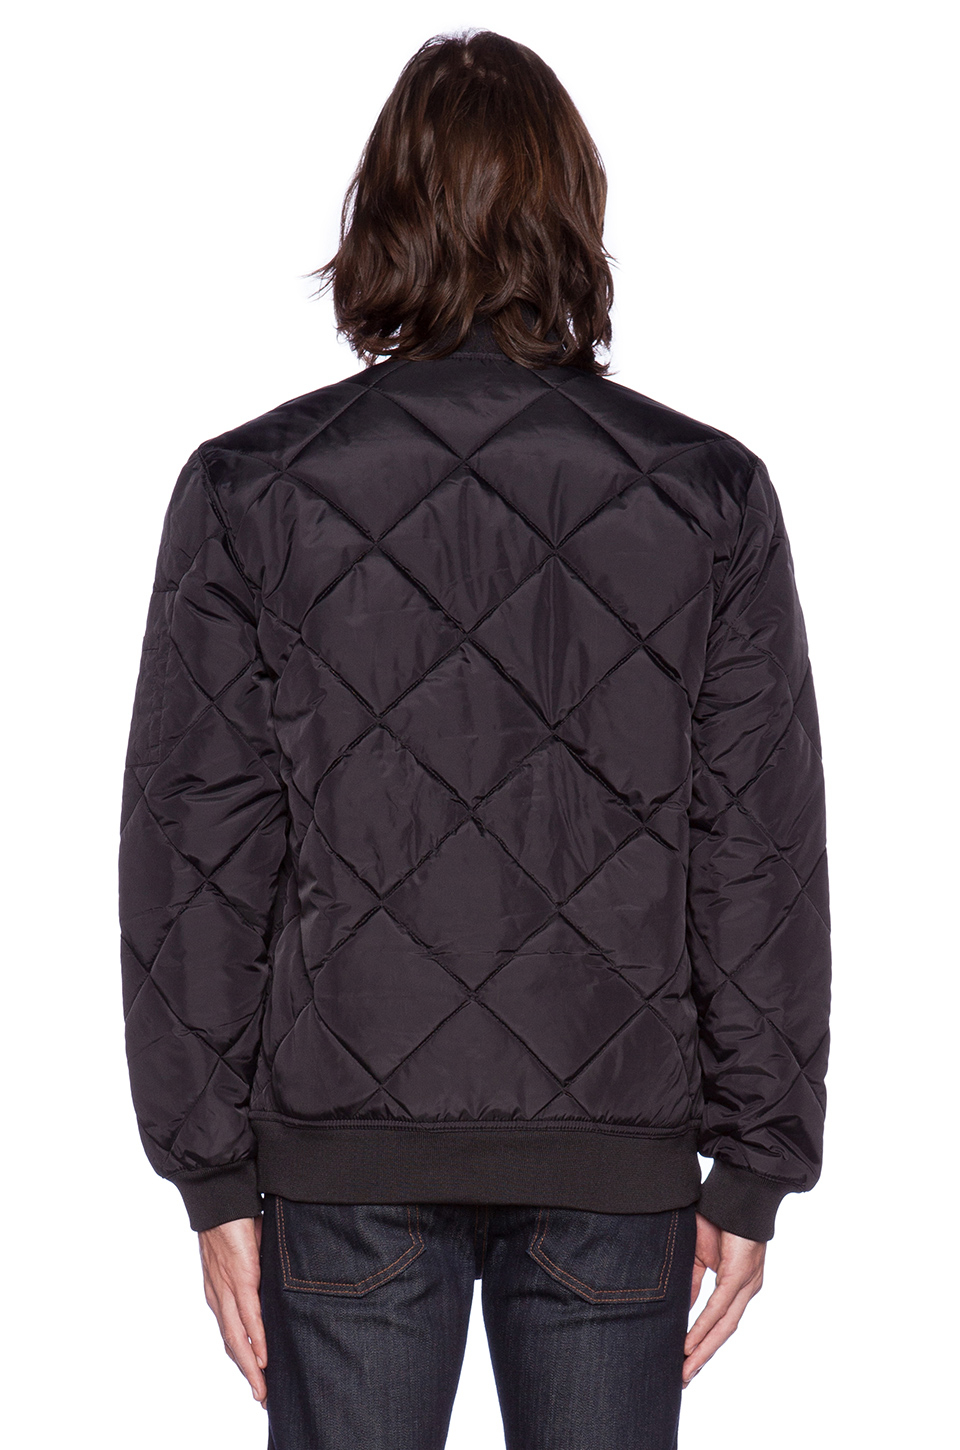 Lyst - Huf Baron Quilted Flight Jacket in Black for Men